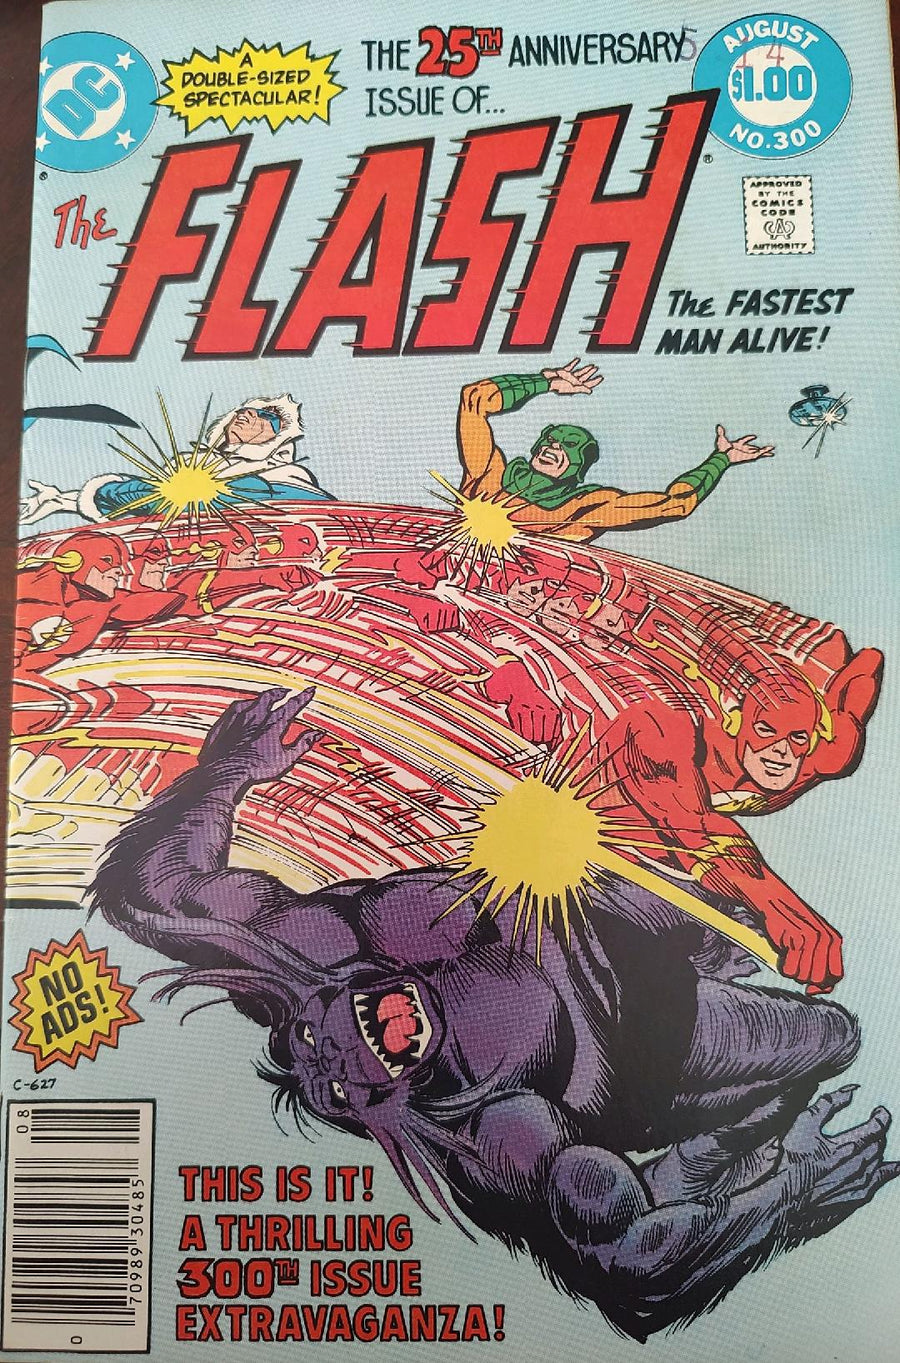 The Flash #300 Comic Book Cover